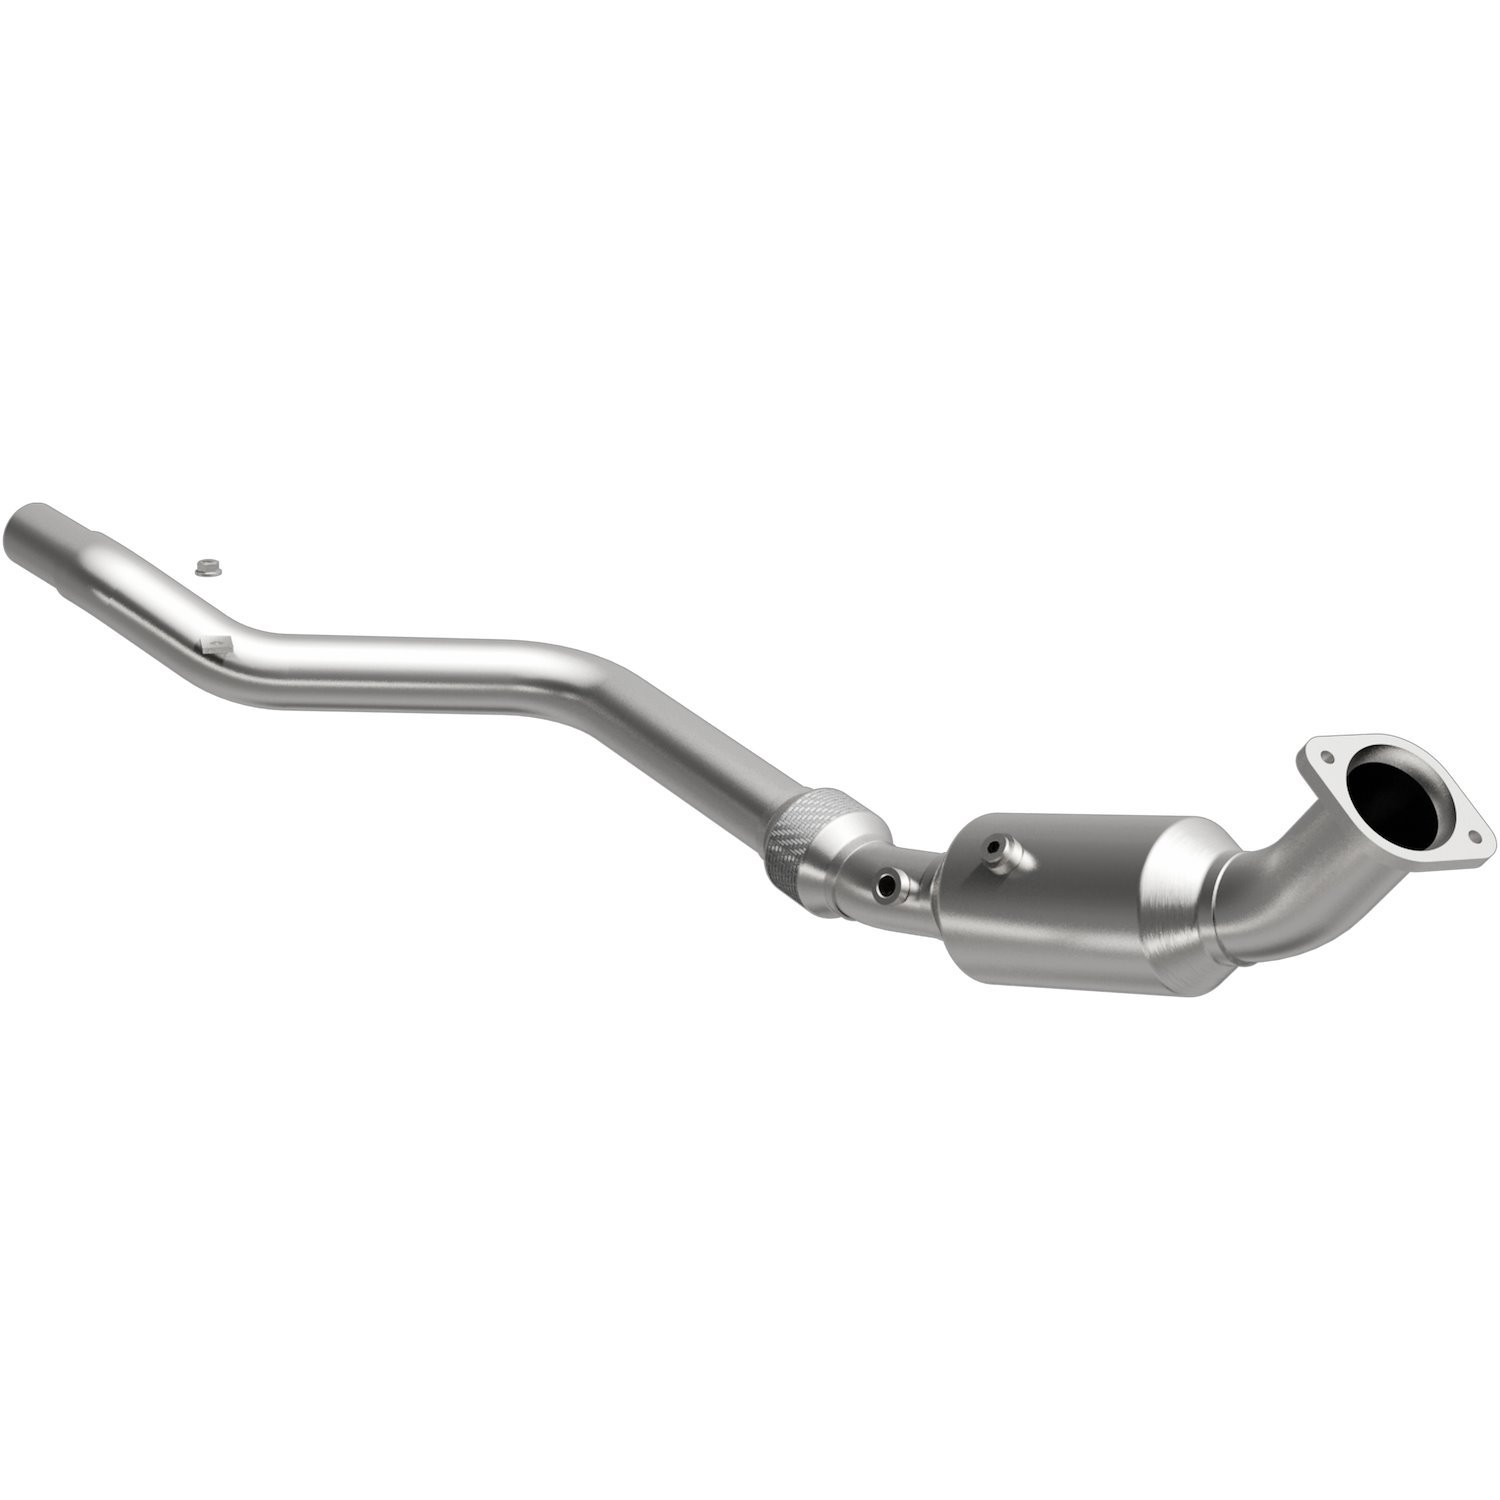 OEM Grade Federal / EPA Compliant Direct-Fit Catalytic Converter 49240